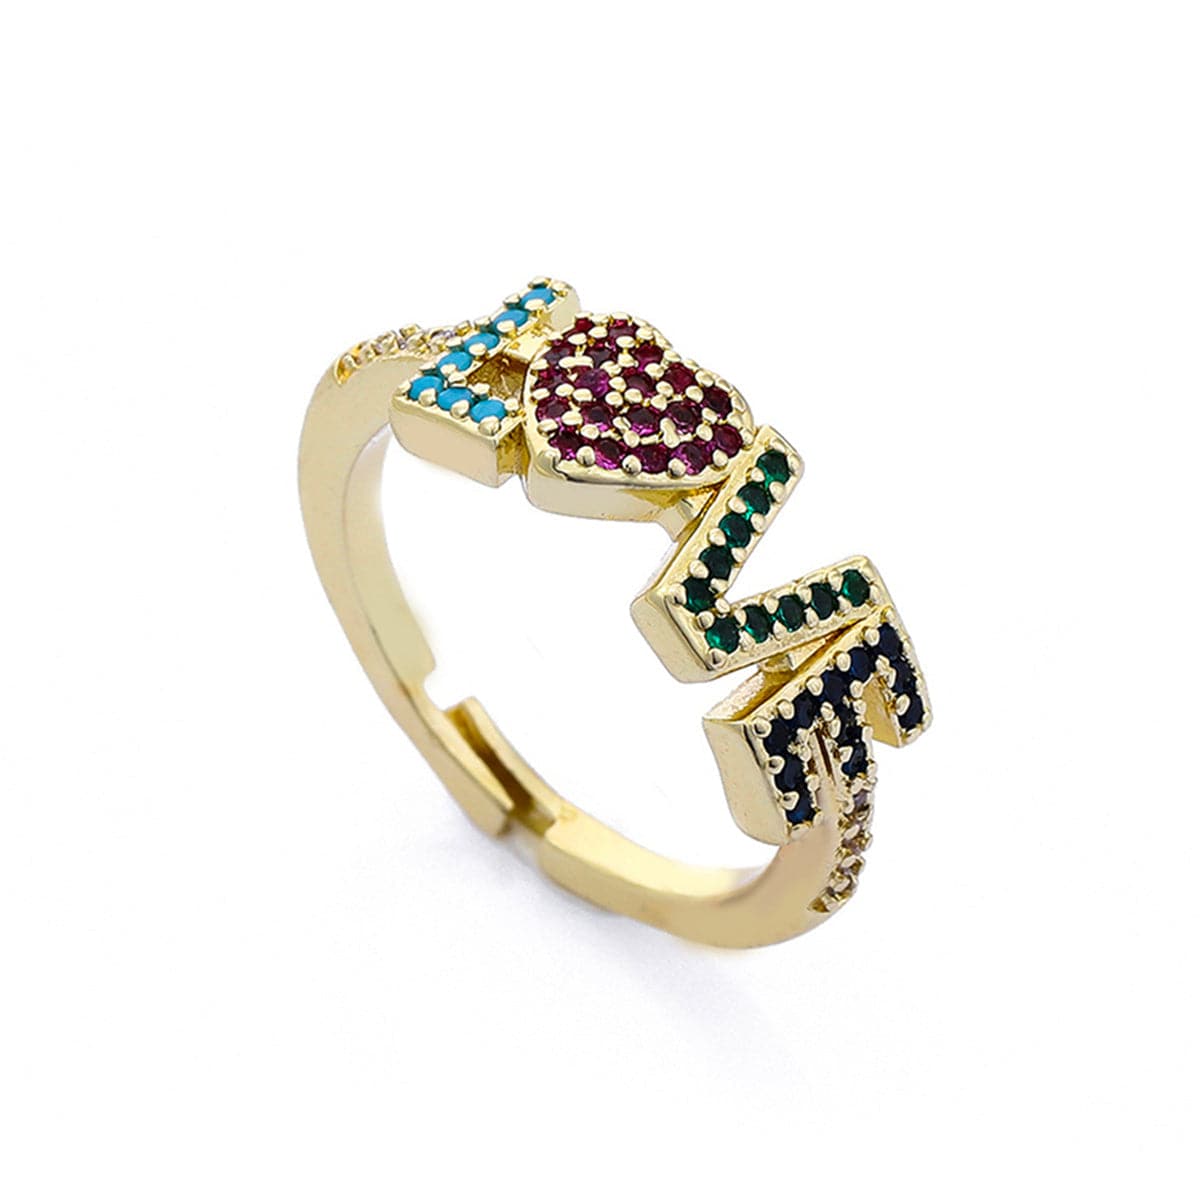 Rainbow Cubic Zirconia & 18K Gold-Plated 'Love' Ring